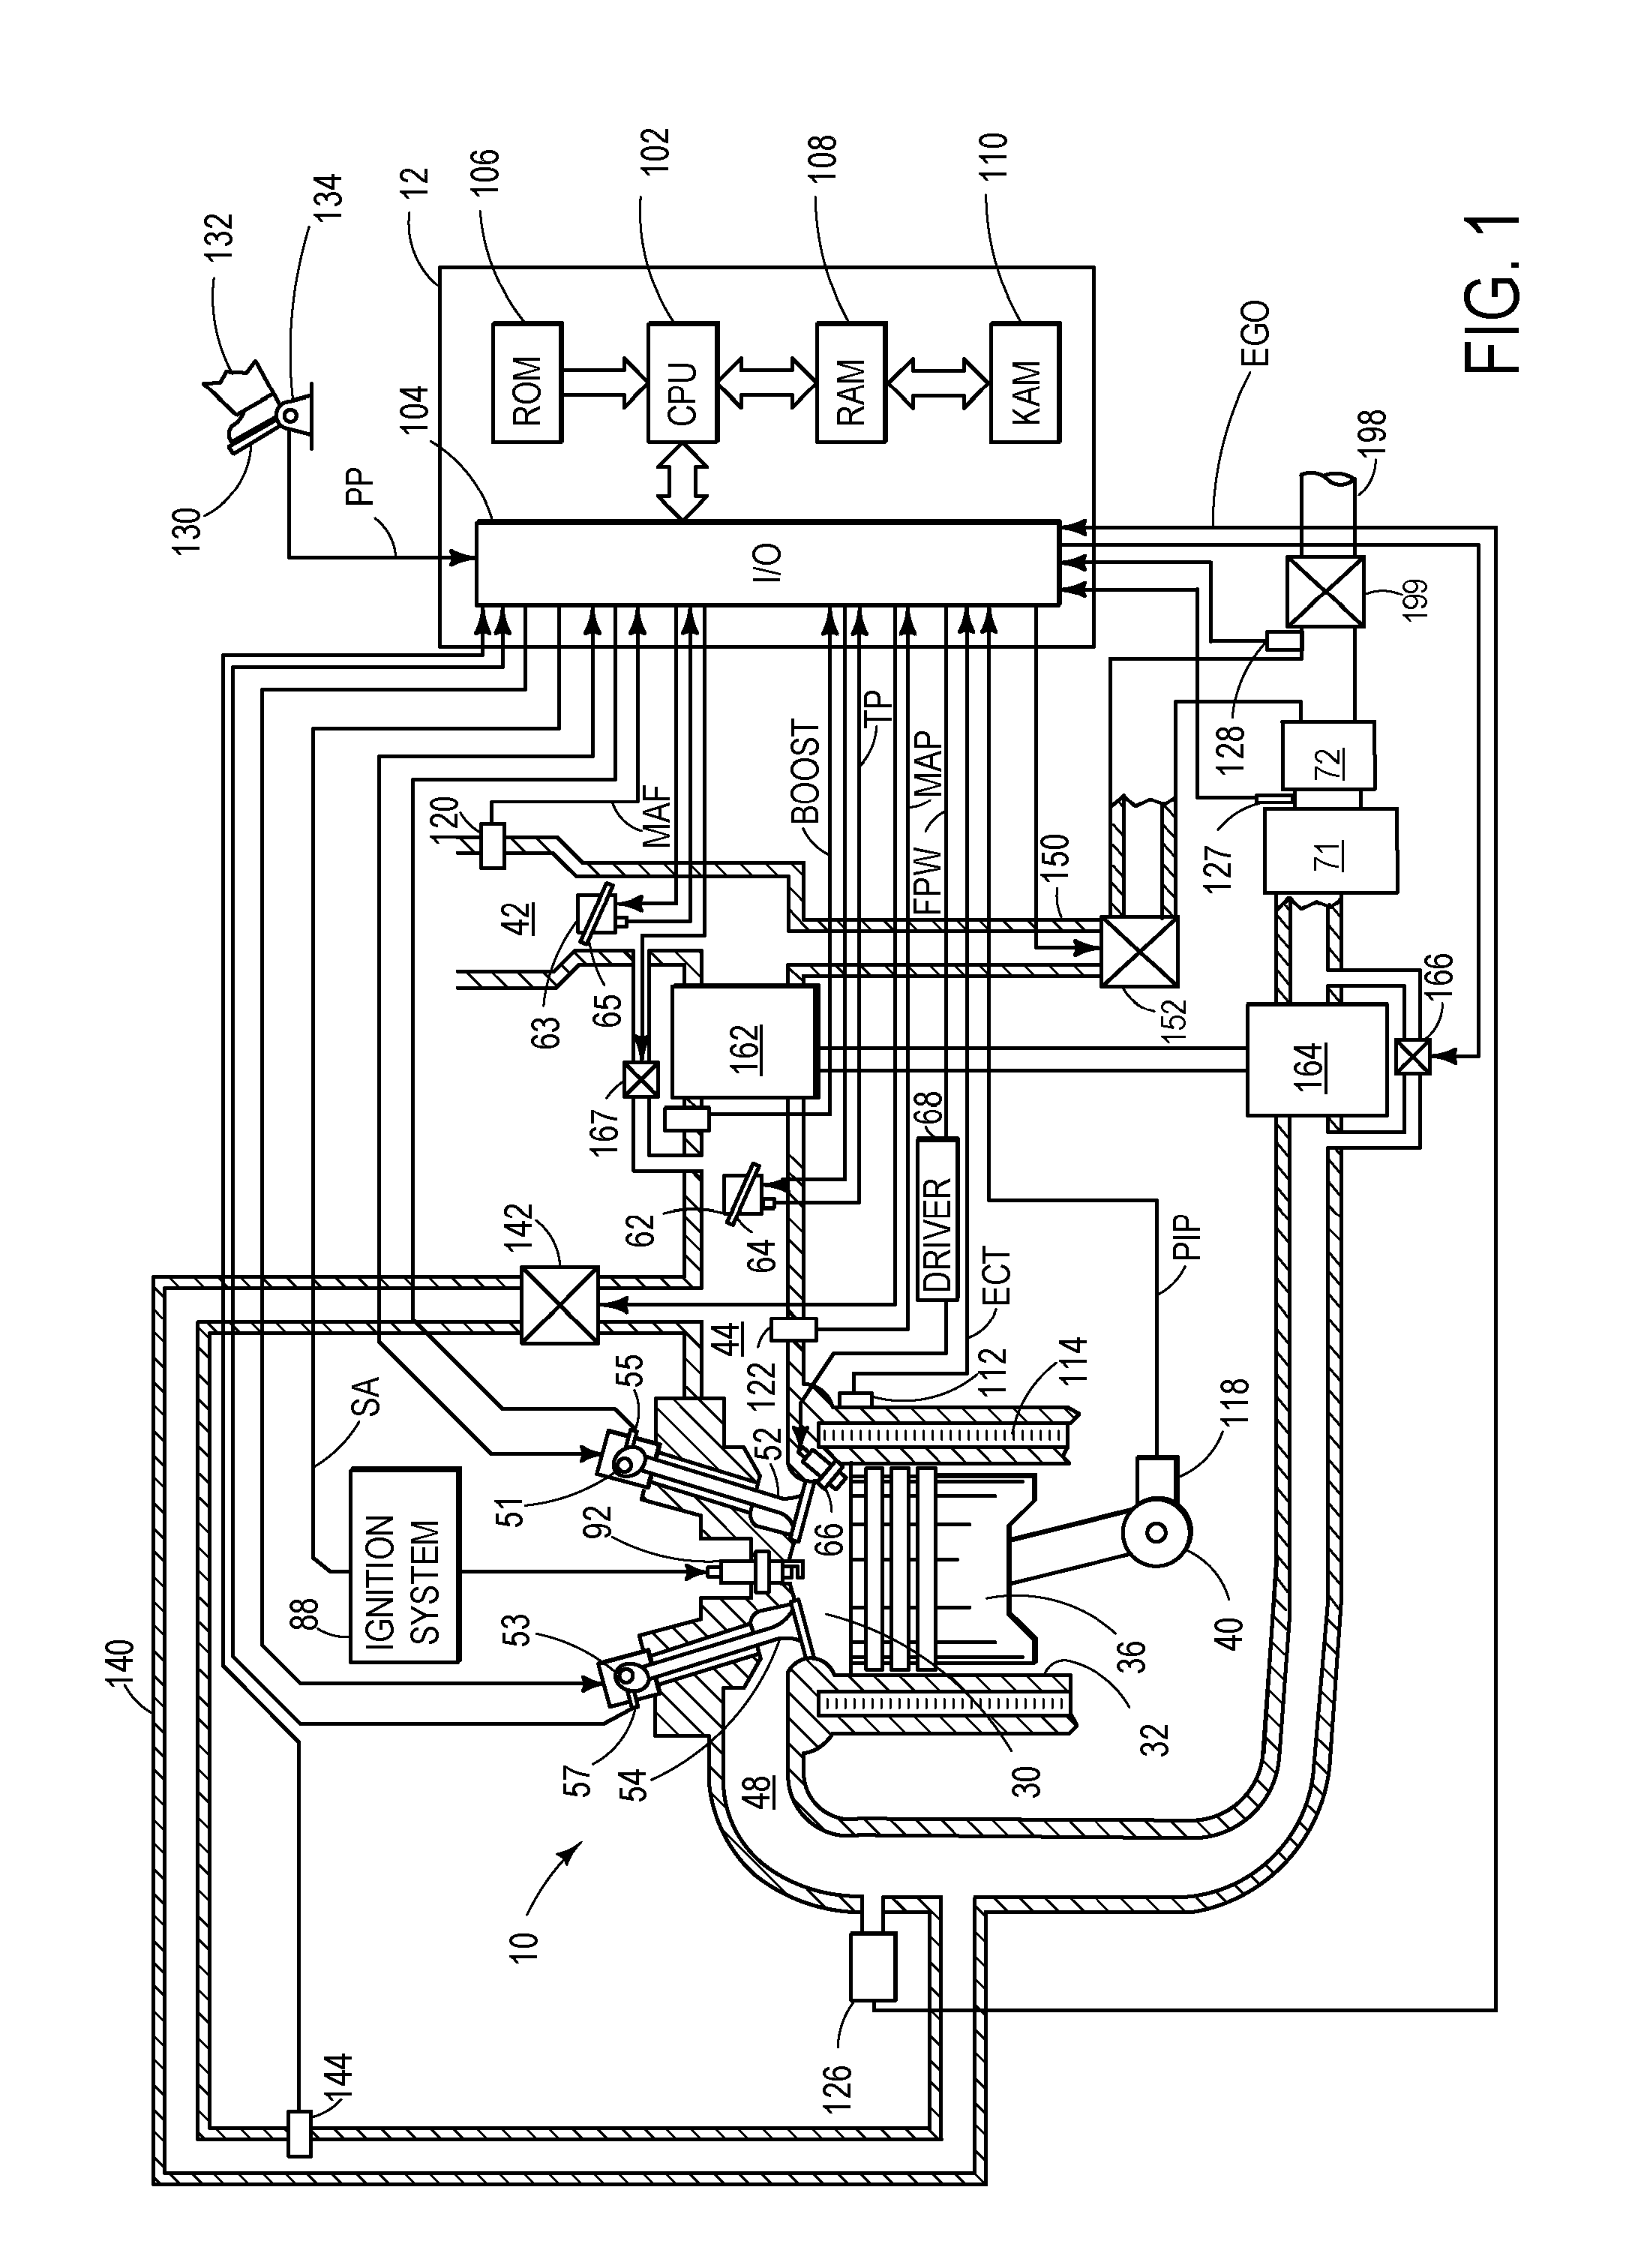 Control of exhaust flow in an engine including a particulate filter